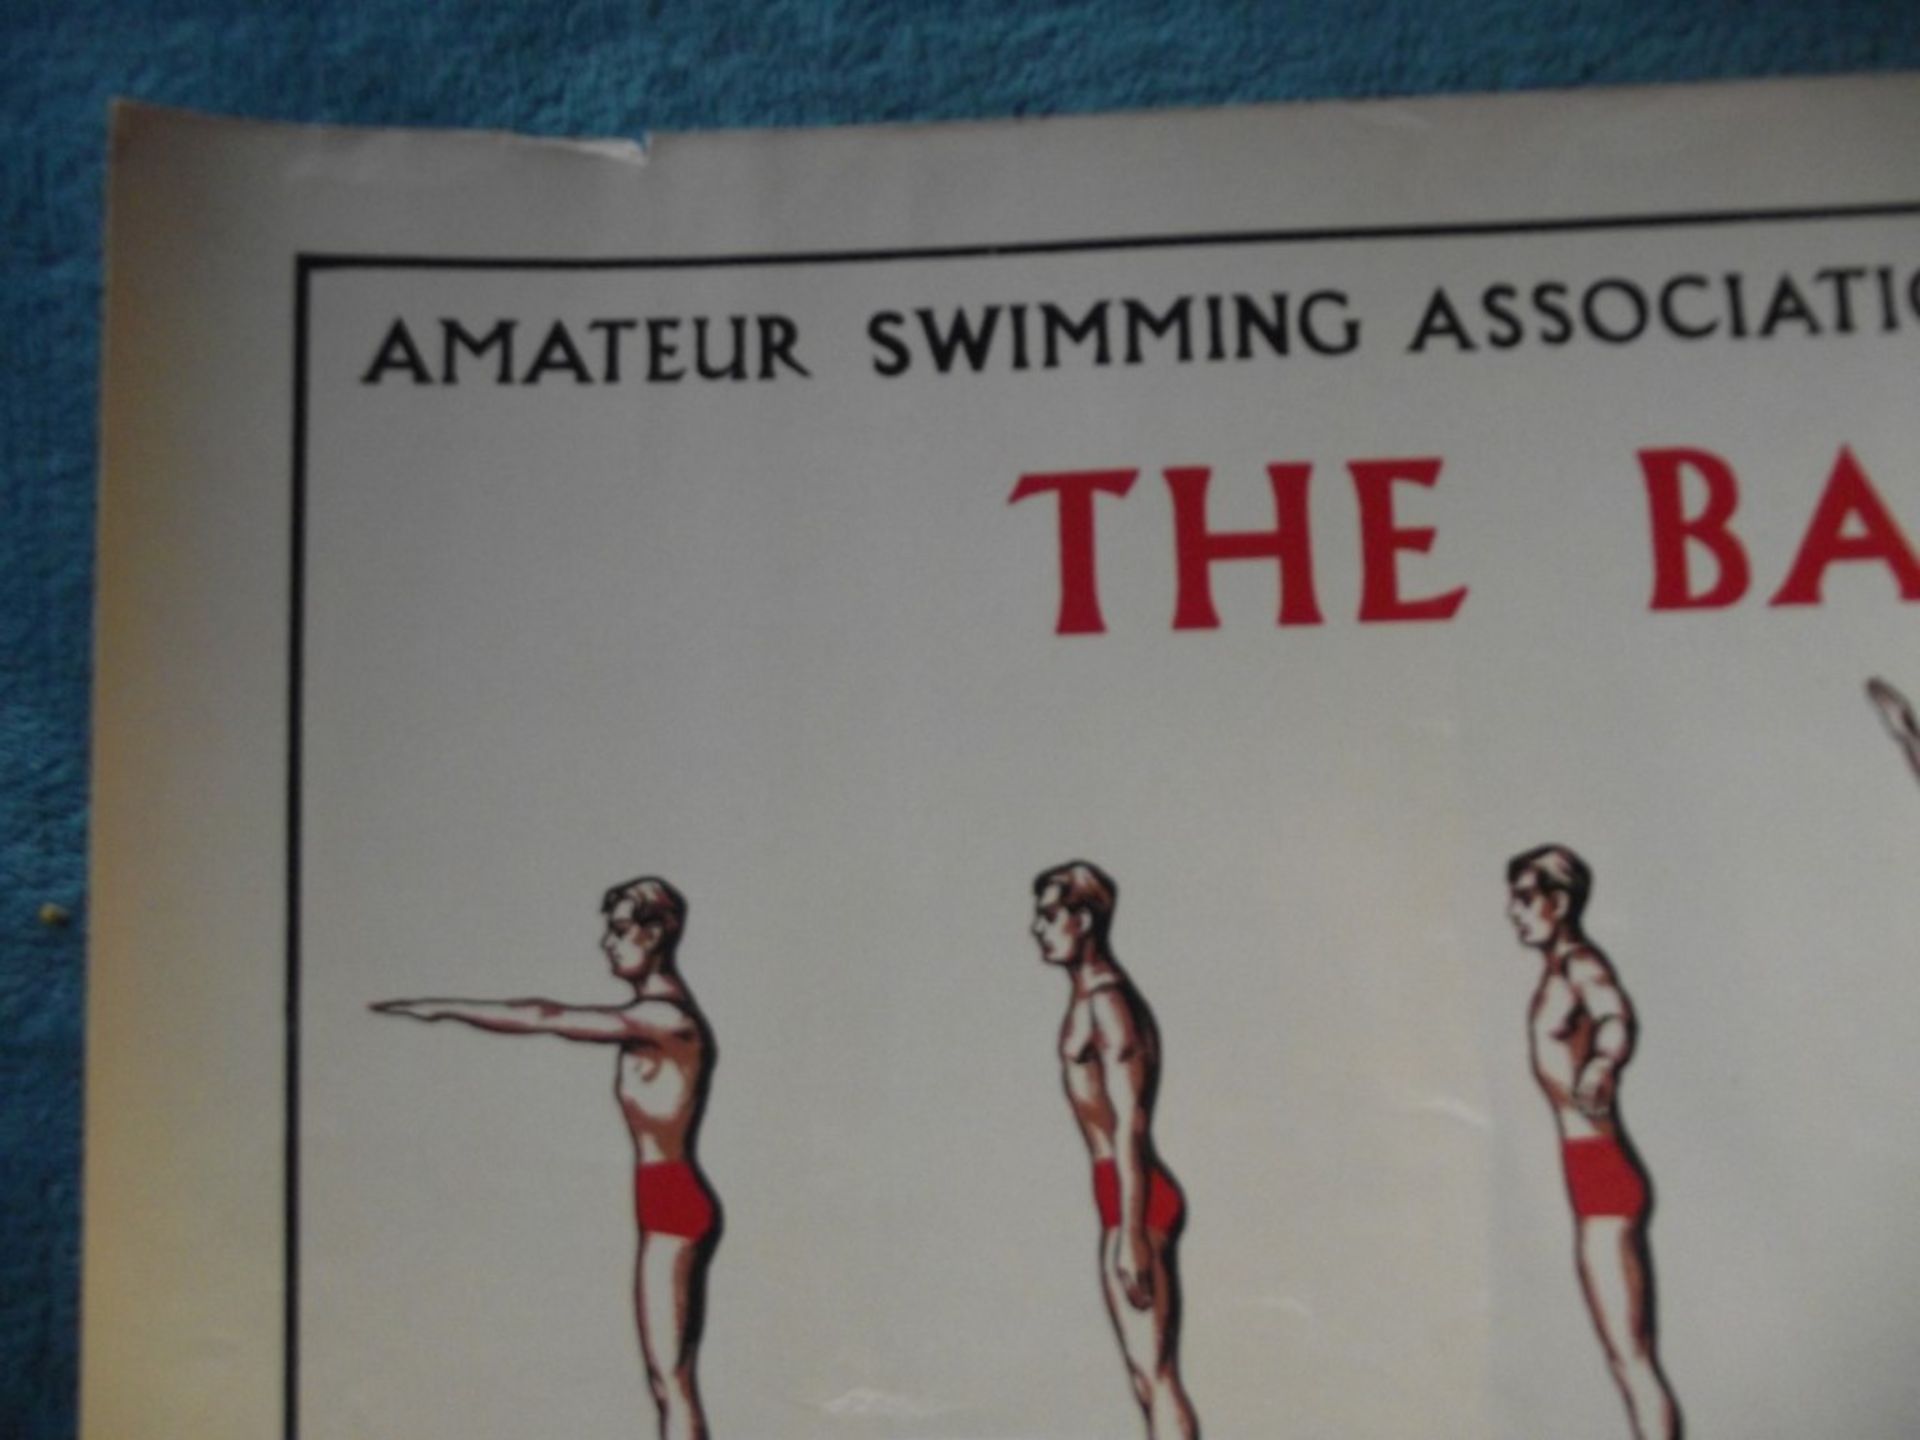 4 X 1950's Original 'Amateur Swimming Association' advertising posters, published by Bovril Ltd. - Image 33 of 51